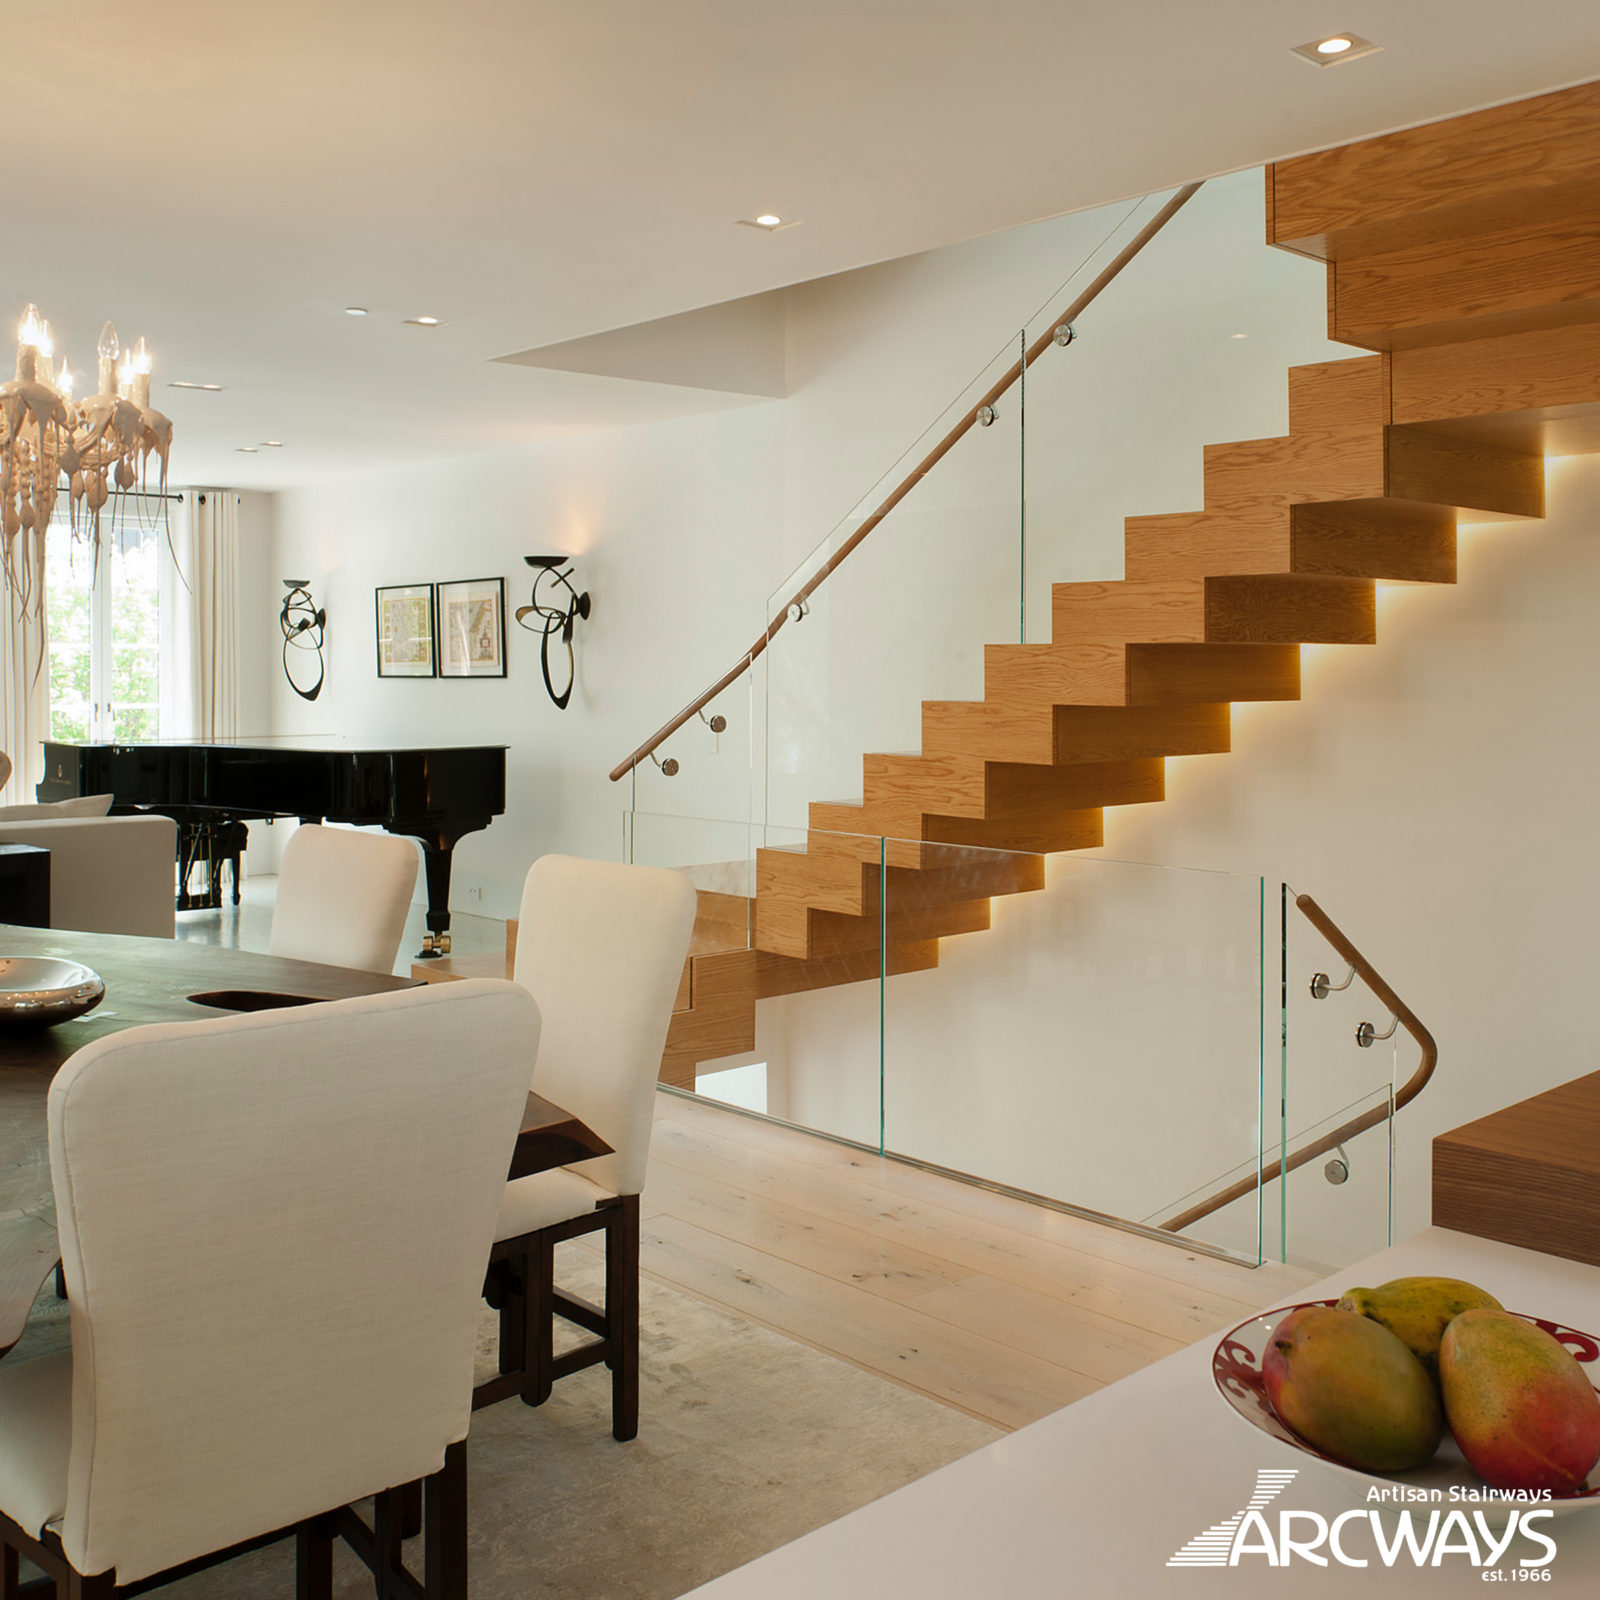 Modern ZigZag Staircase in White Oak with Glass Railing | Georgetown, D.C.